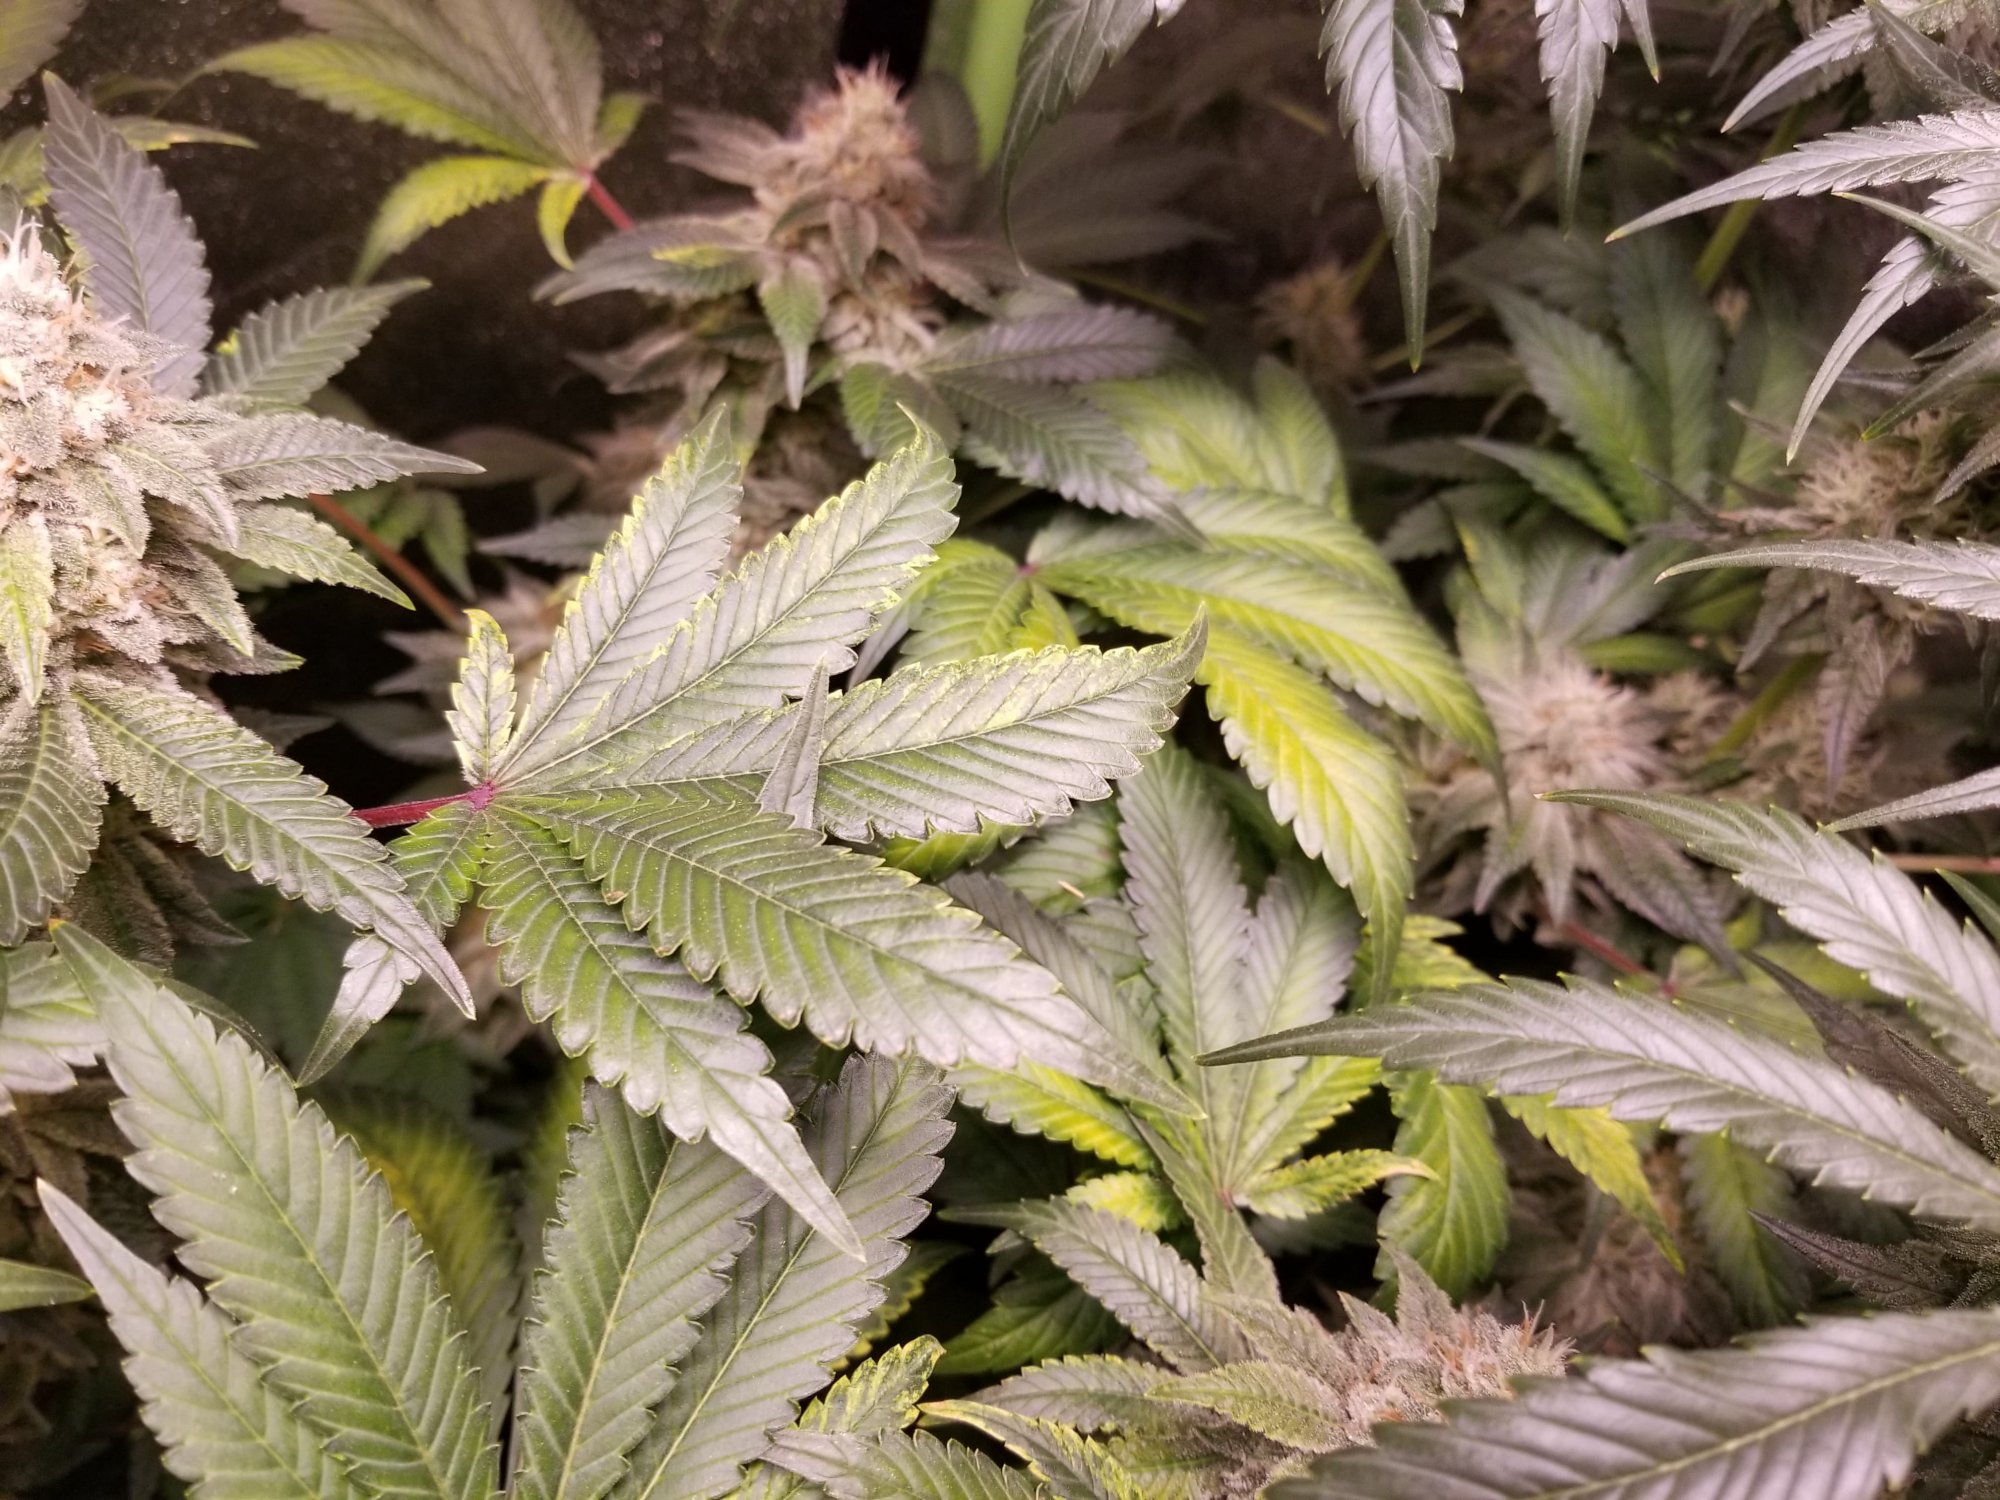 Yellowing leaves over night   nute problem or finishing off 2